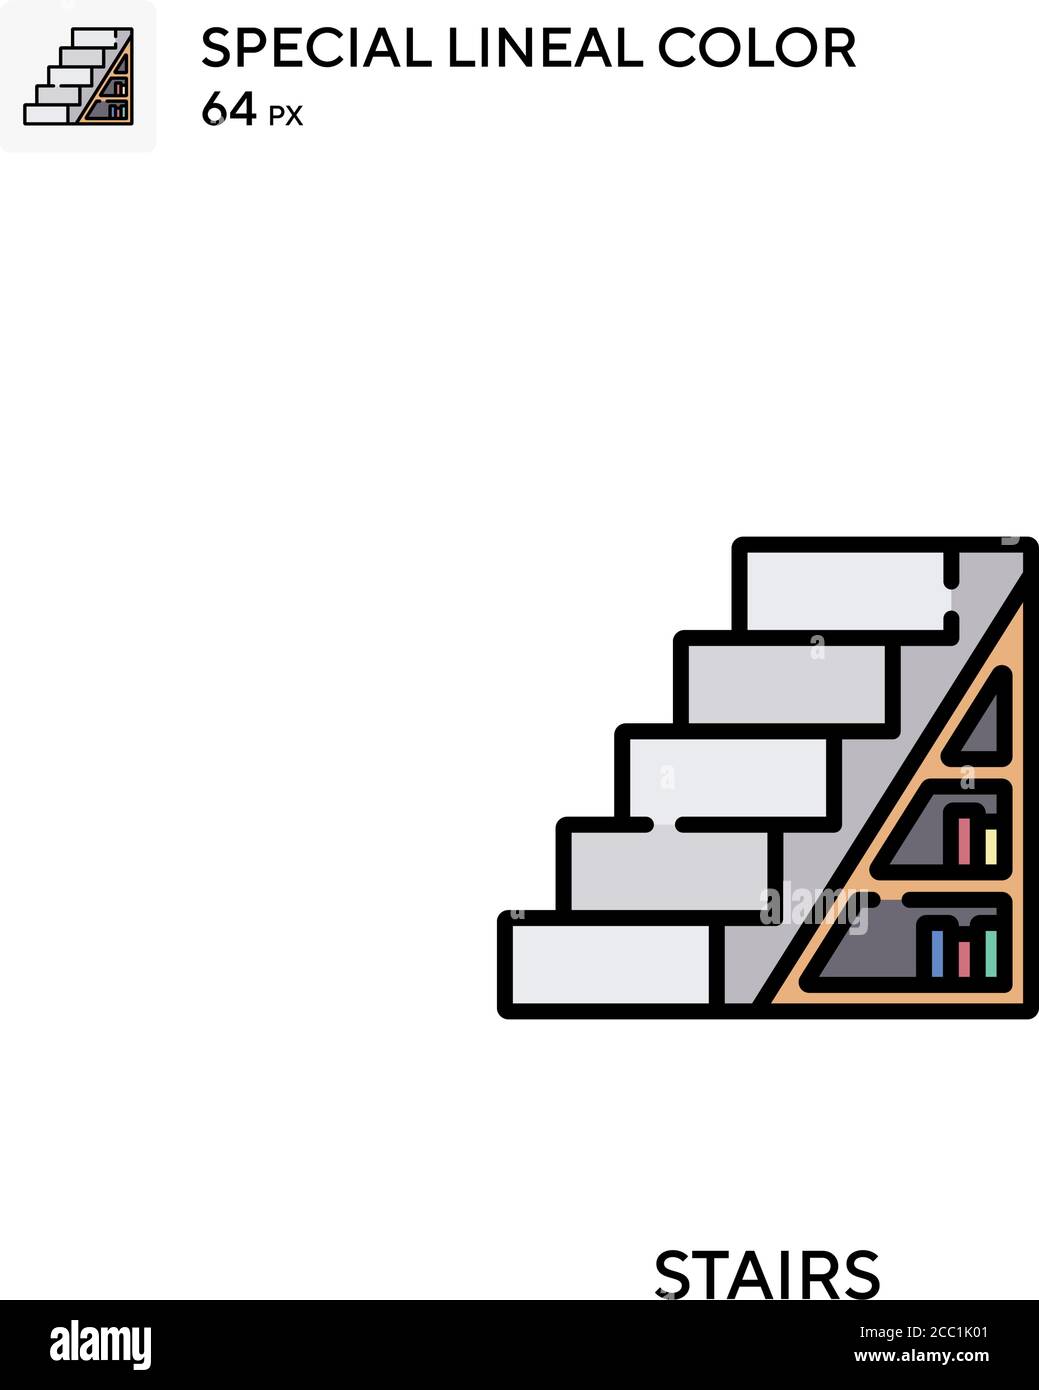 Stairs Special lineal color vector icon. Stairs icons for your business project Stock Vector